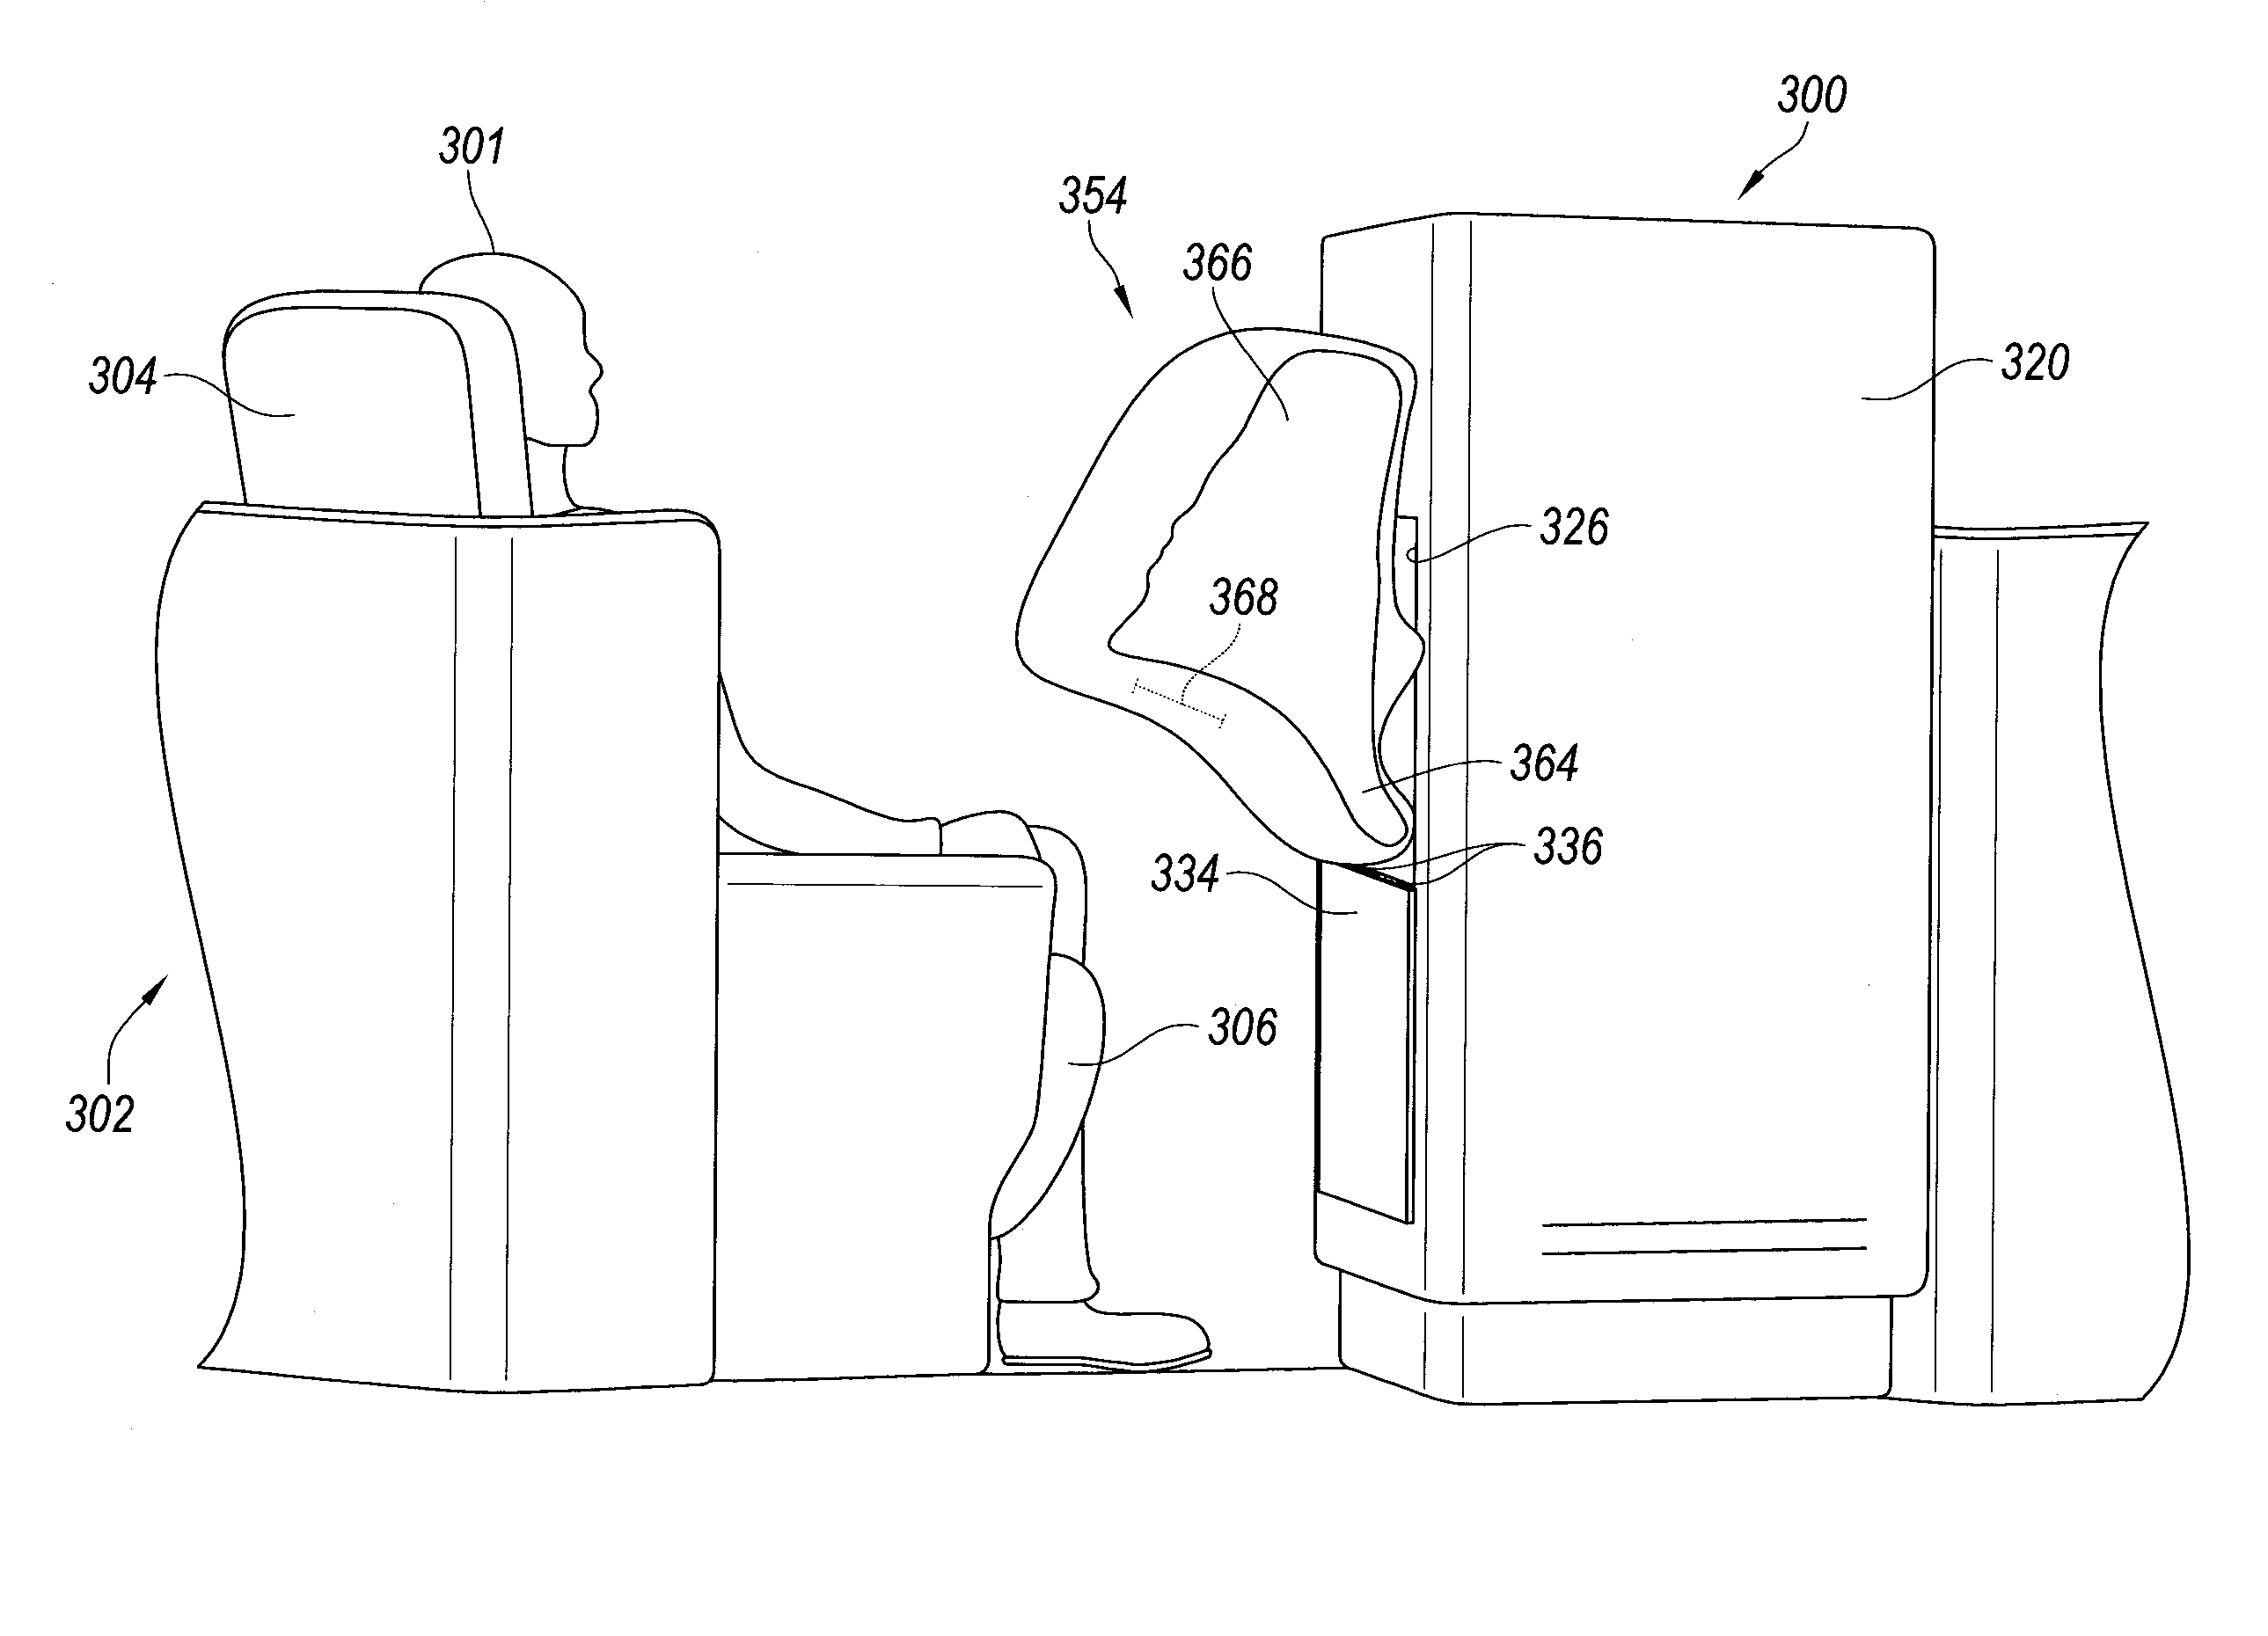 Structure mounted airbag assemblies and associated systems and methods